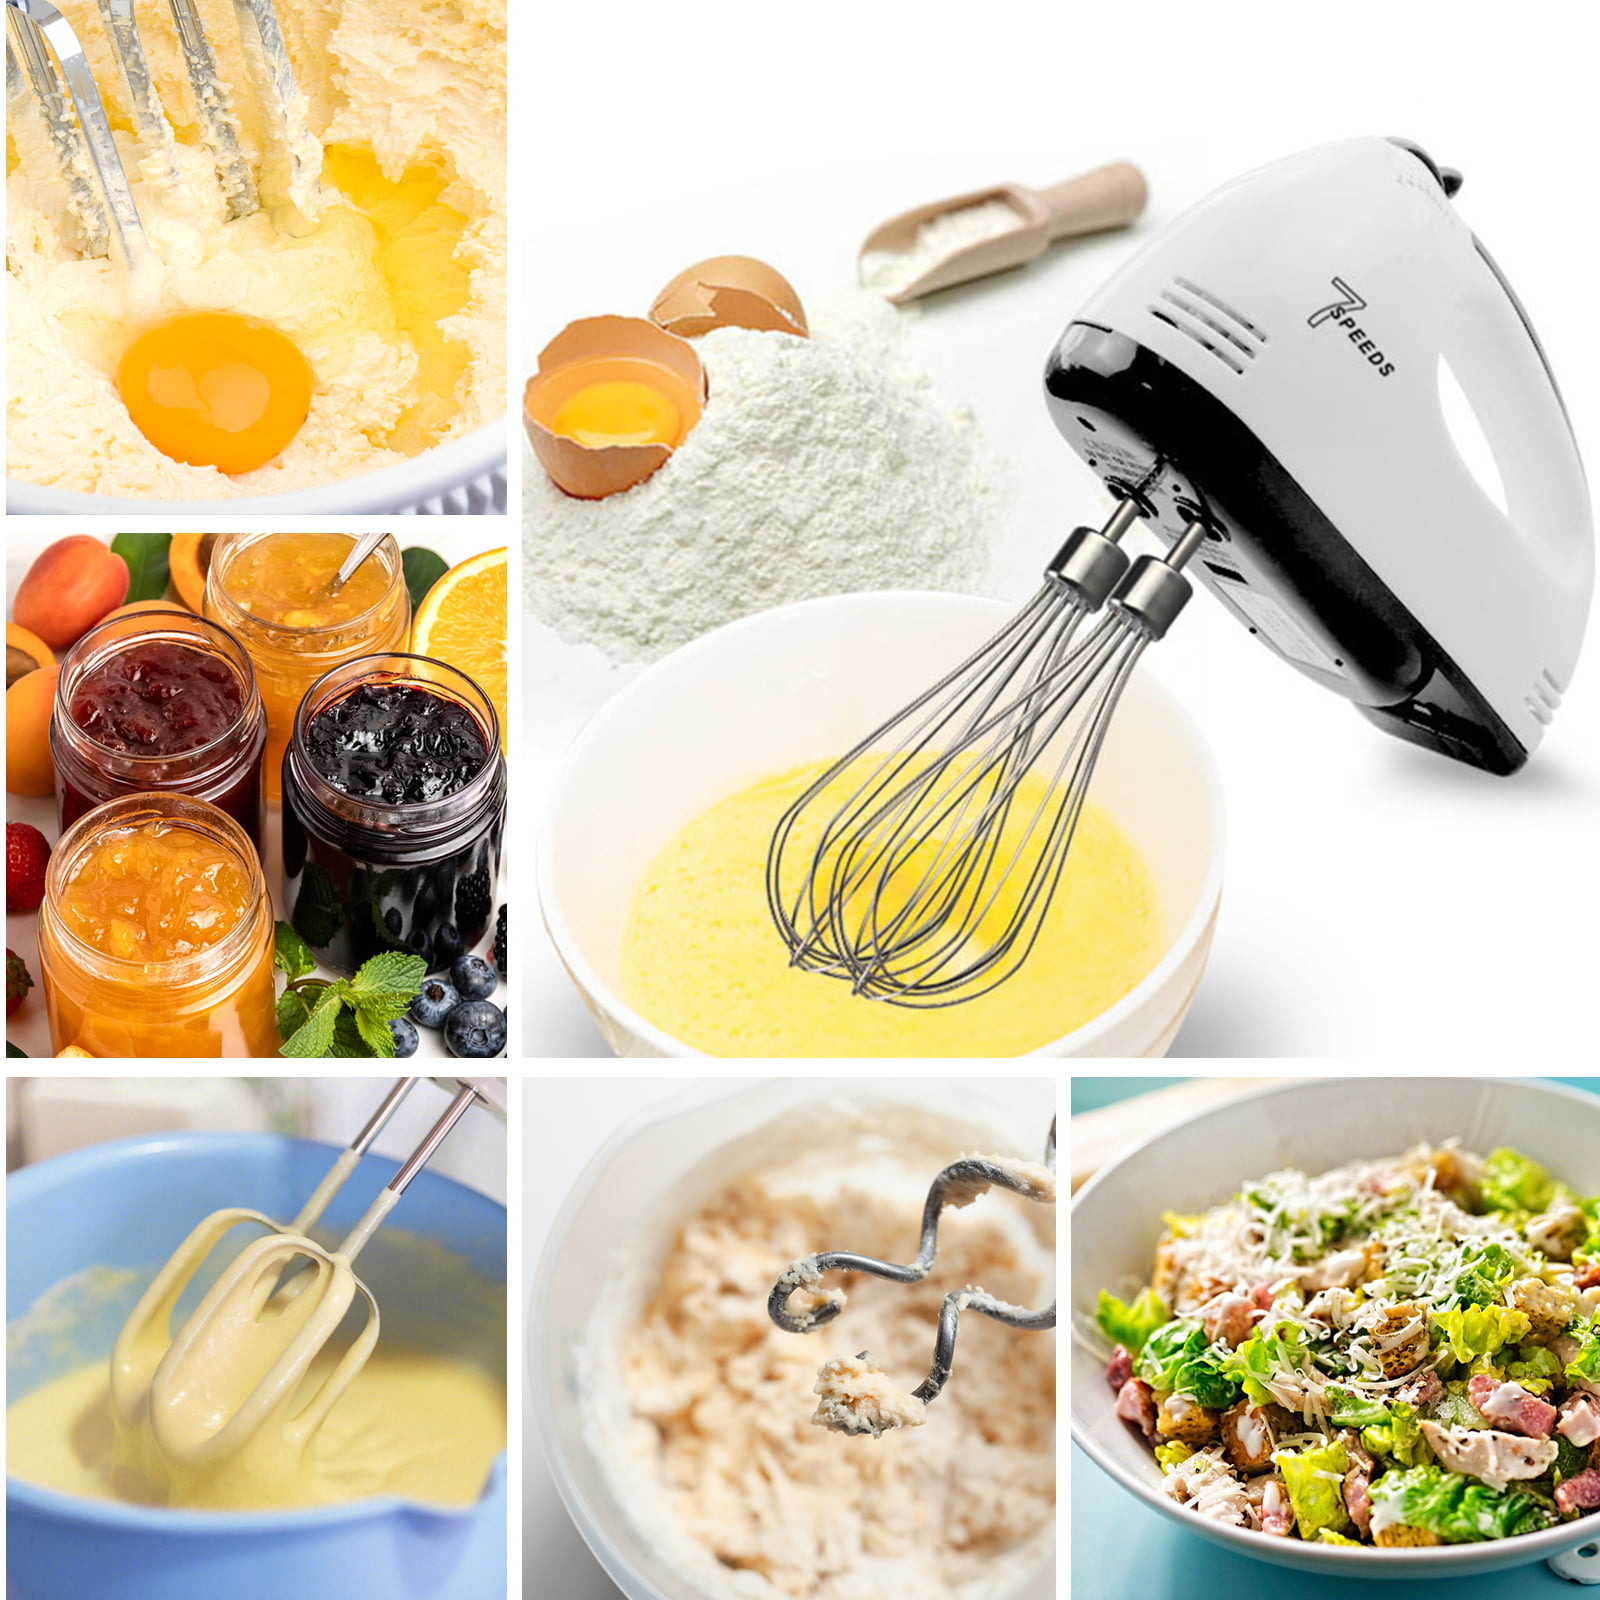 Hand Mixer Electric Whisk 180W Power 7 Speed Handheld for Kitchen Baking,  White